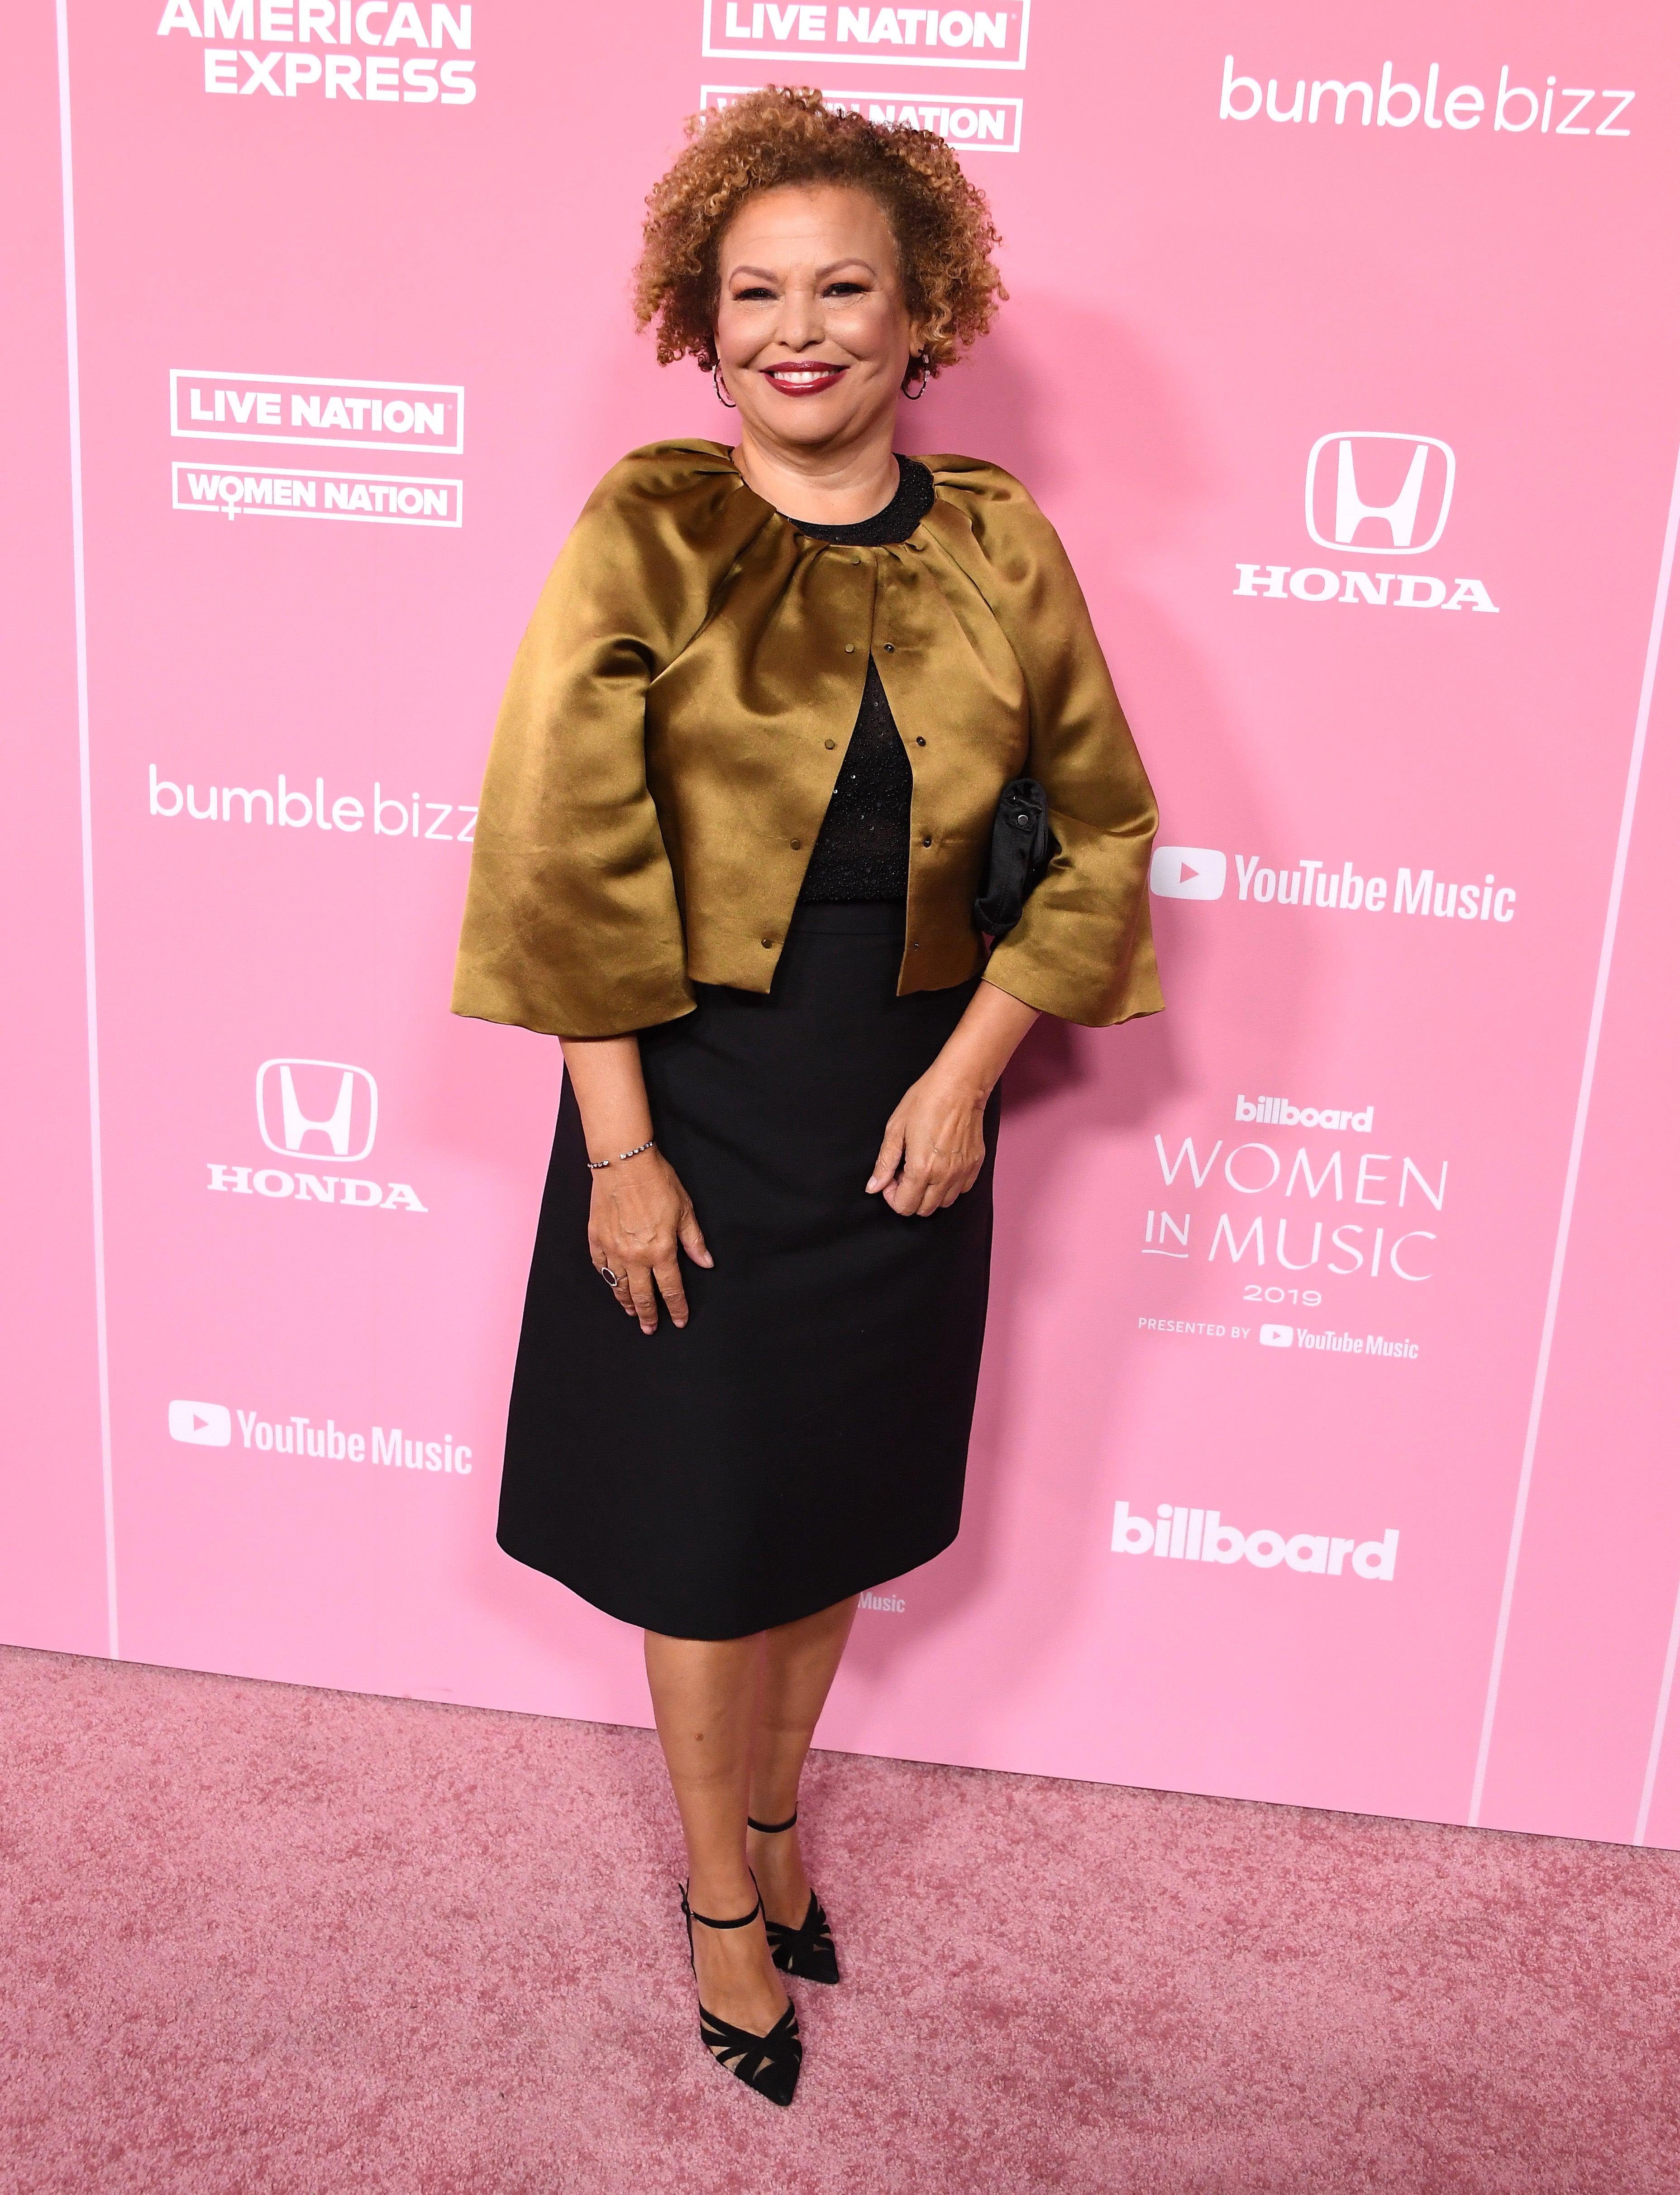 The Best Fashion Moments At The 2019 Billboard 'Women In Music' Awards